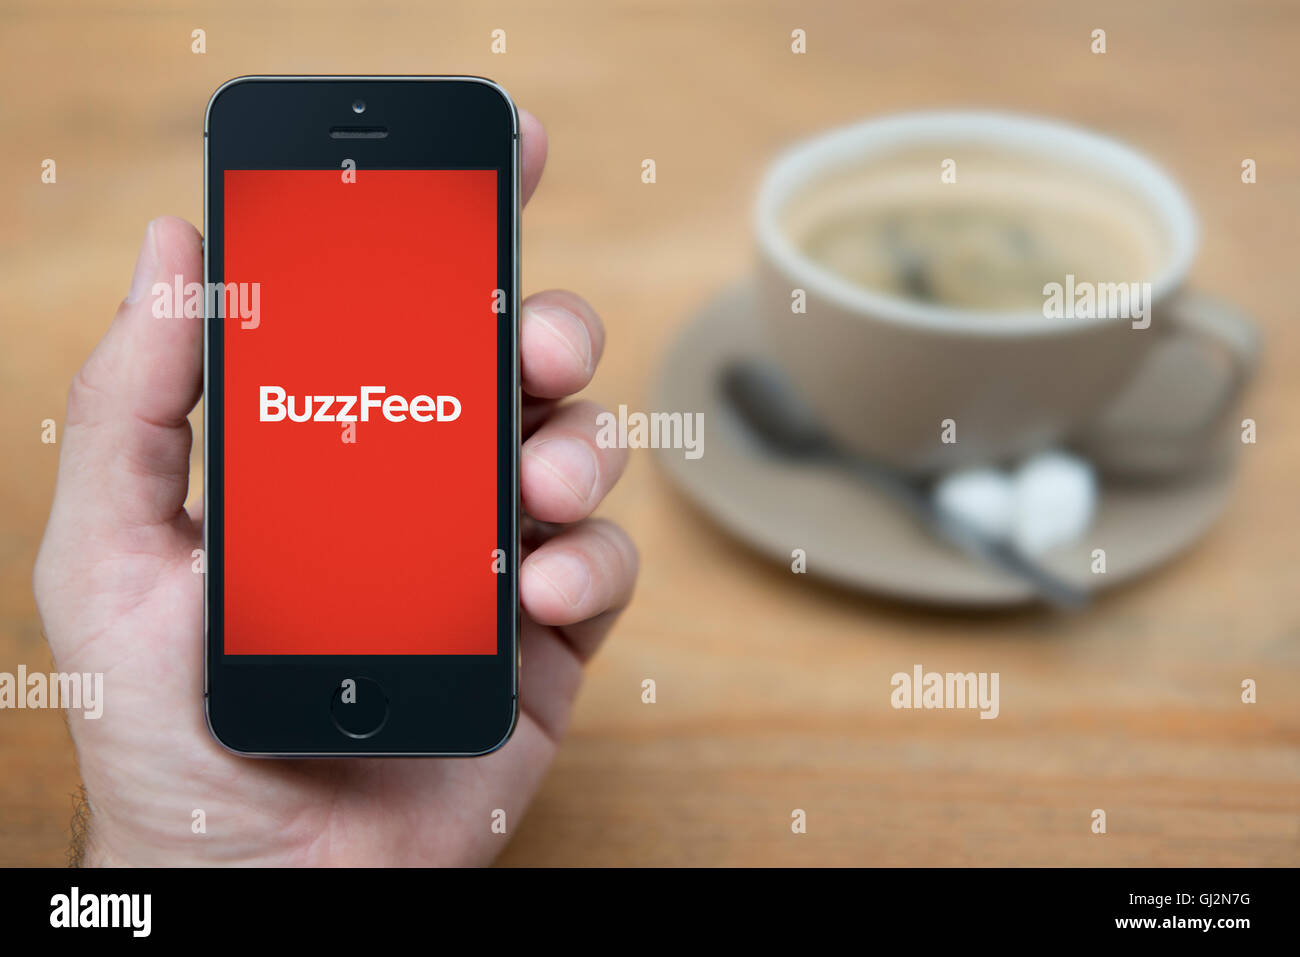 A man looks at his iPhone which displays the BuzzFeed logo, while sat with a cup of coffee (Editorial use only). Stock Photo